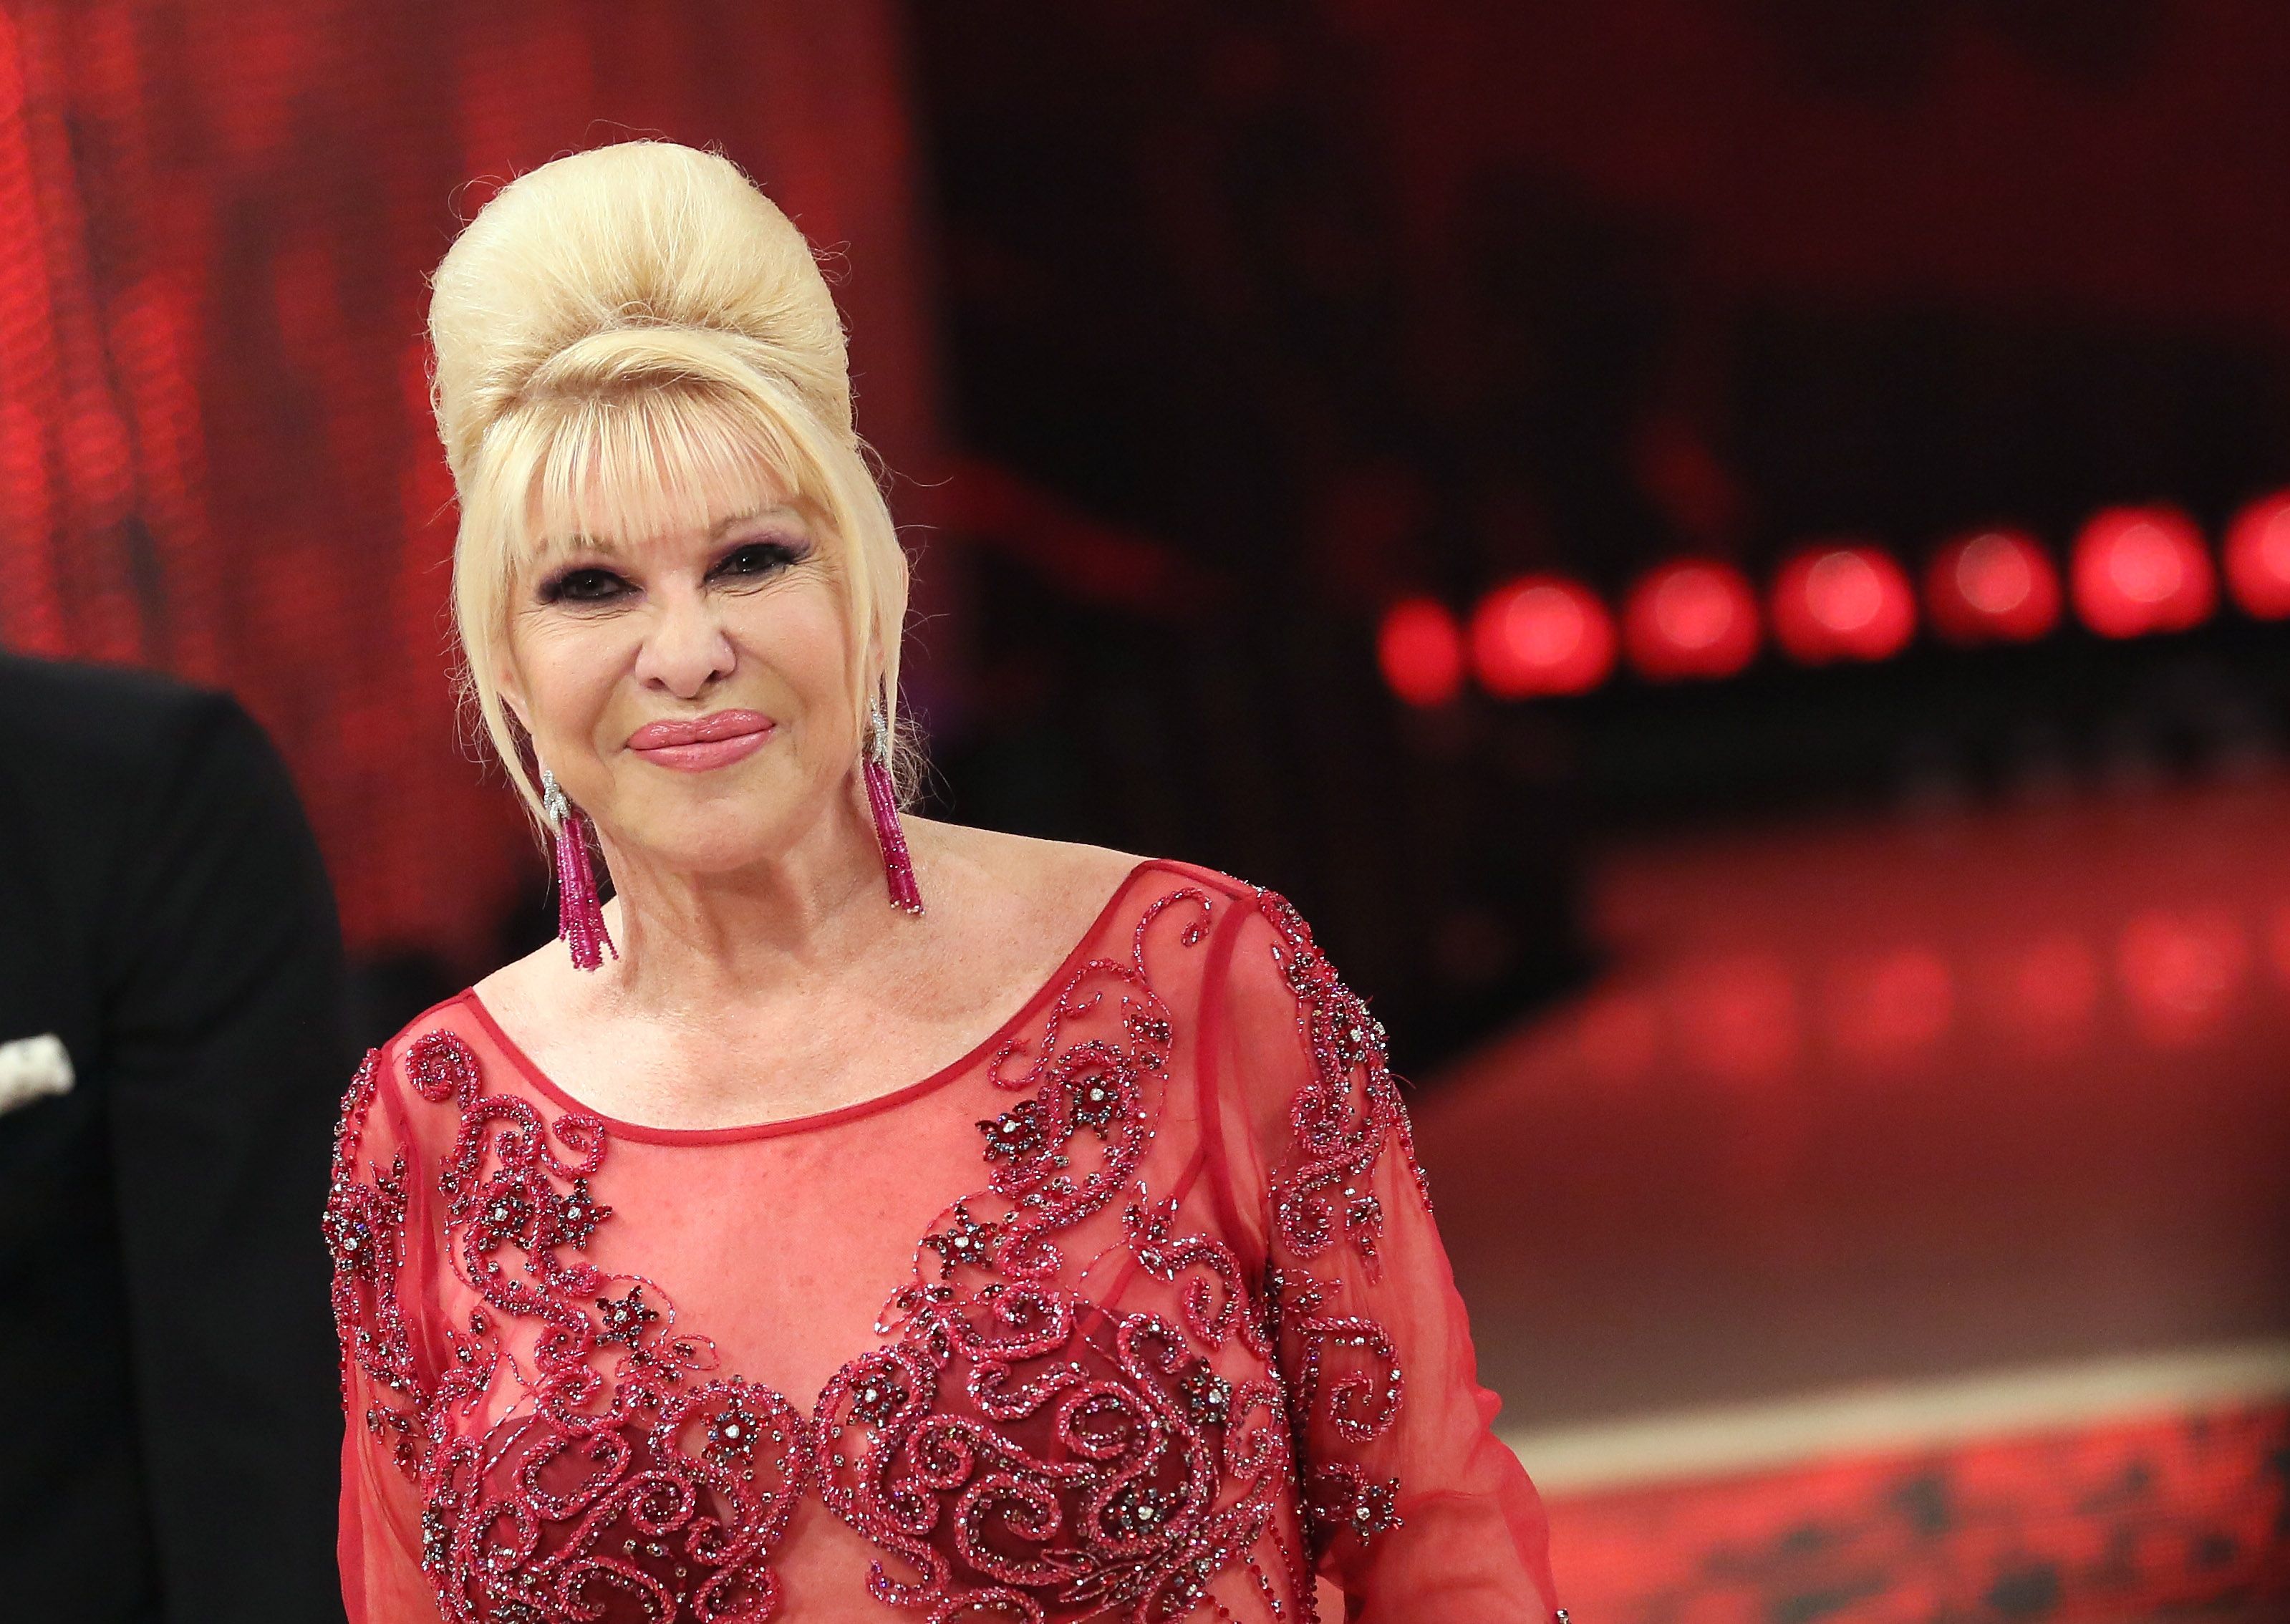 Ivana Trump attends the Italian TV show 'Ballando Con Le Stelle' (Dancing with the Stars) at RAI Auditorium on May 5, 2018 in Rome, Italy. | Source: Getty Images